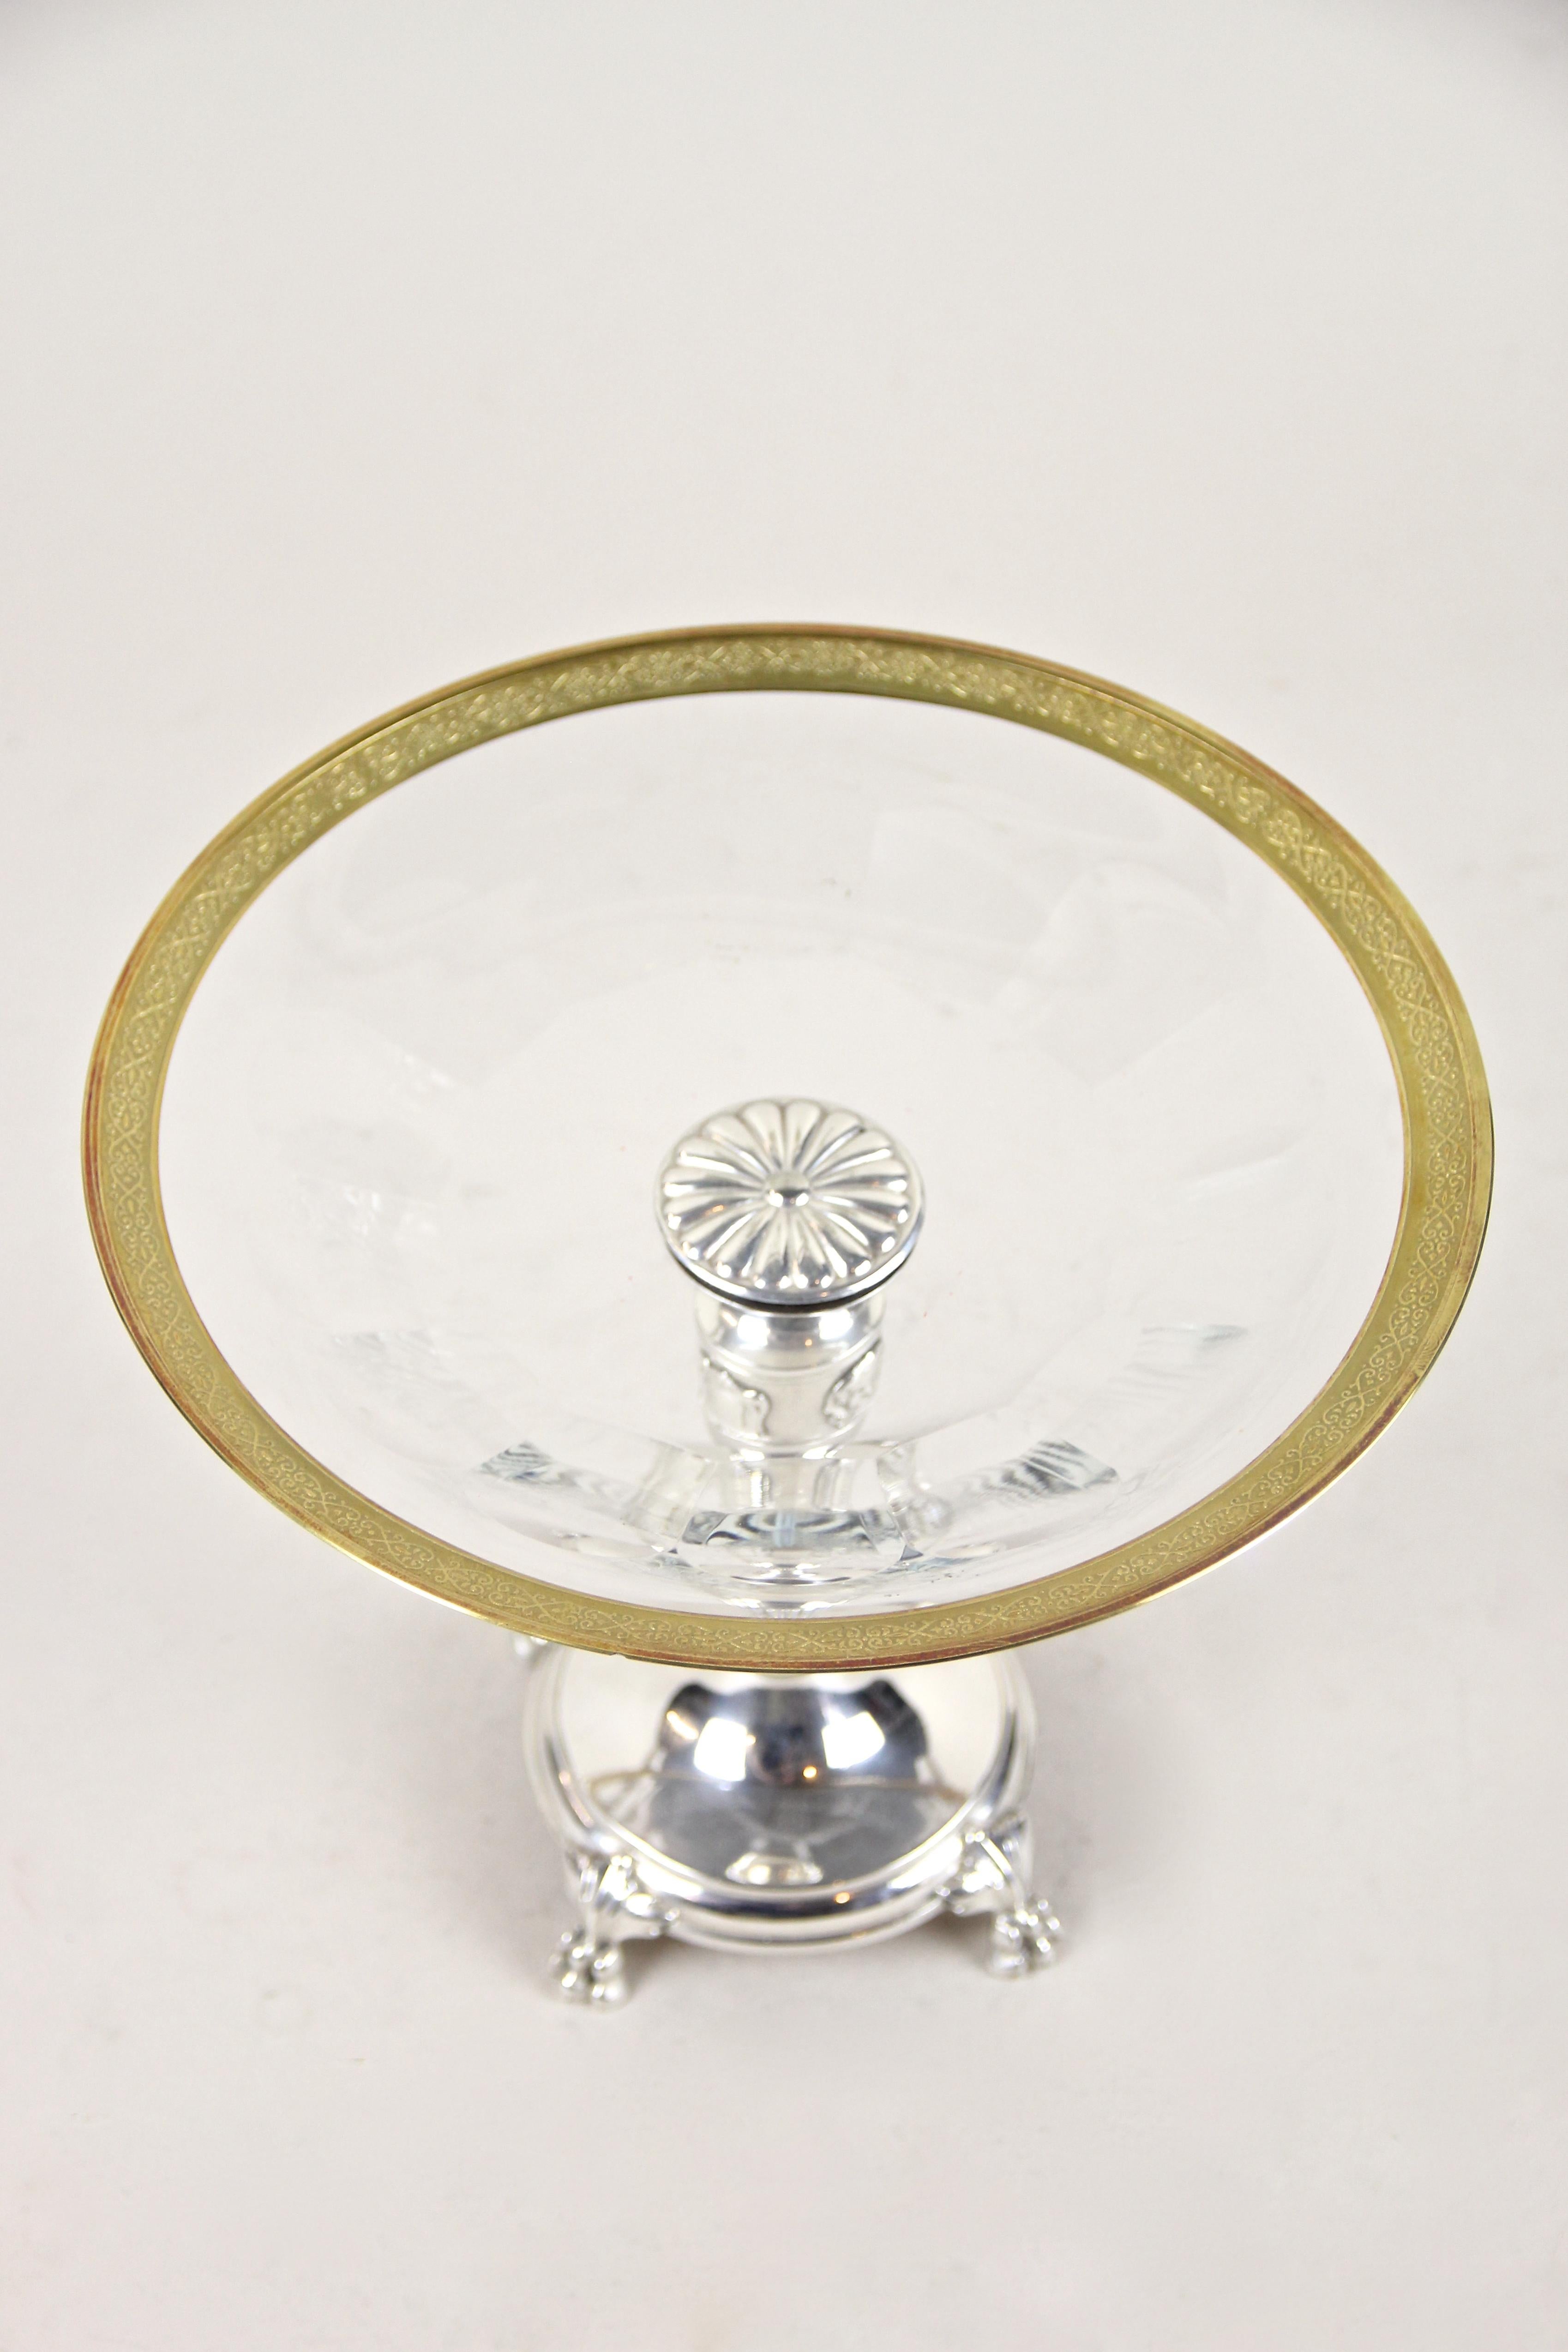 Metal Silvered Centerpiece by Berndorf with Gilt Moser Glassworks Plate, circa 1910